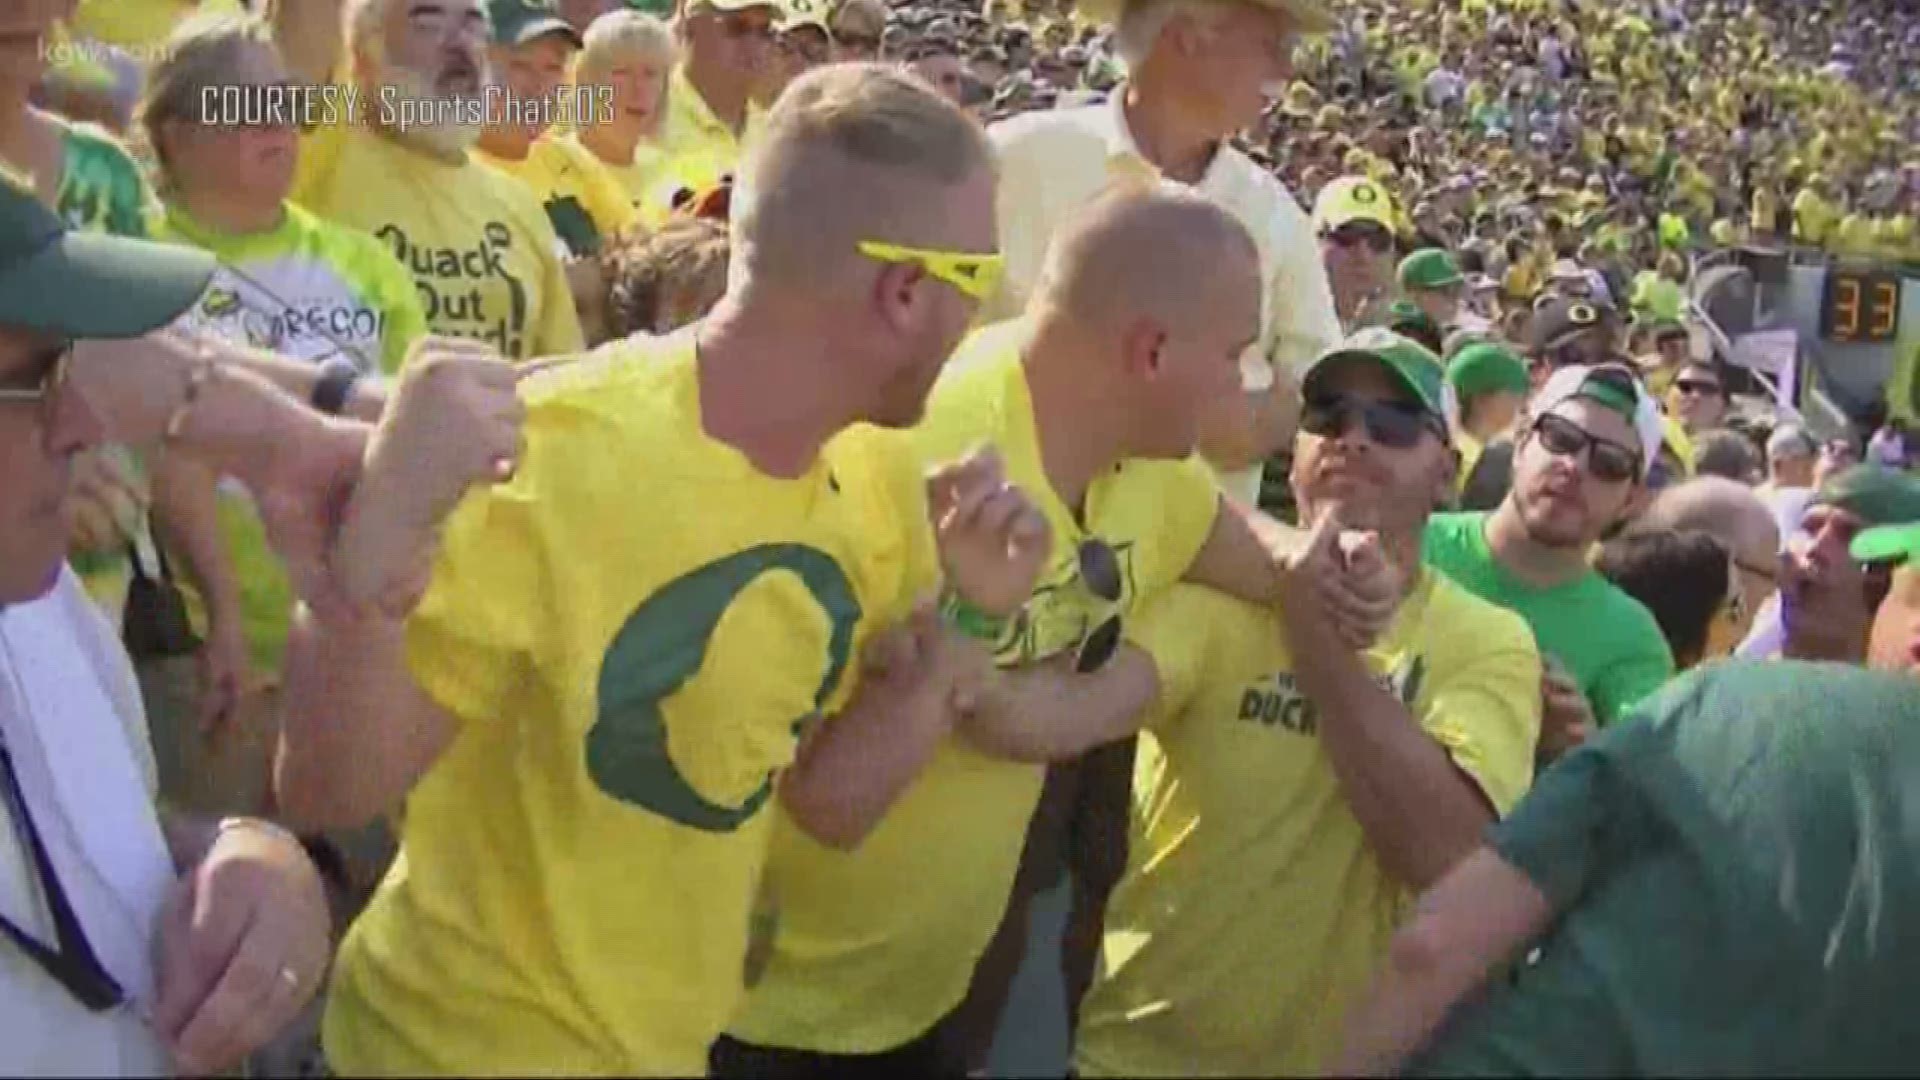 KGW Investigation: Fans behaving badly at college football games